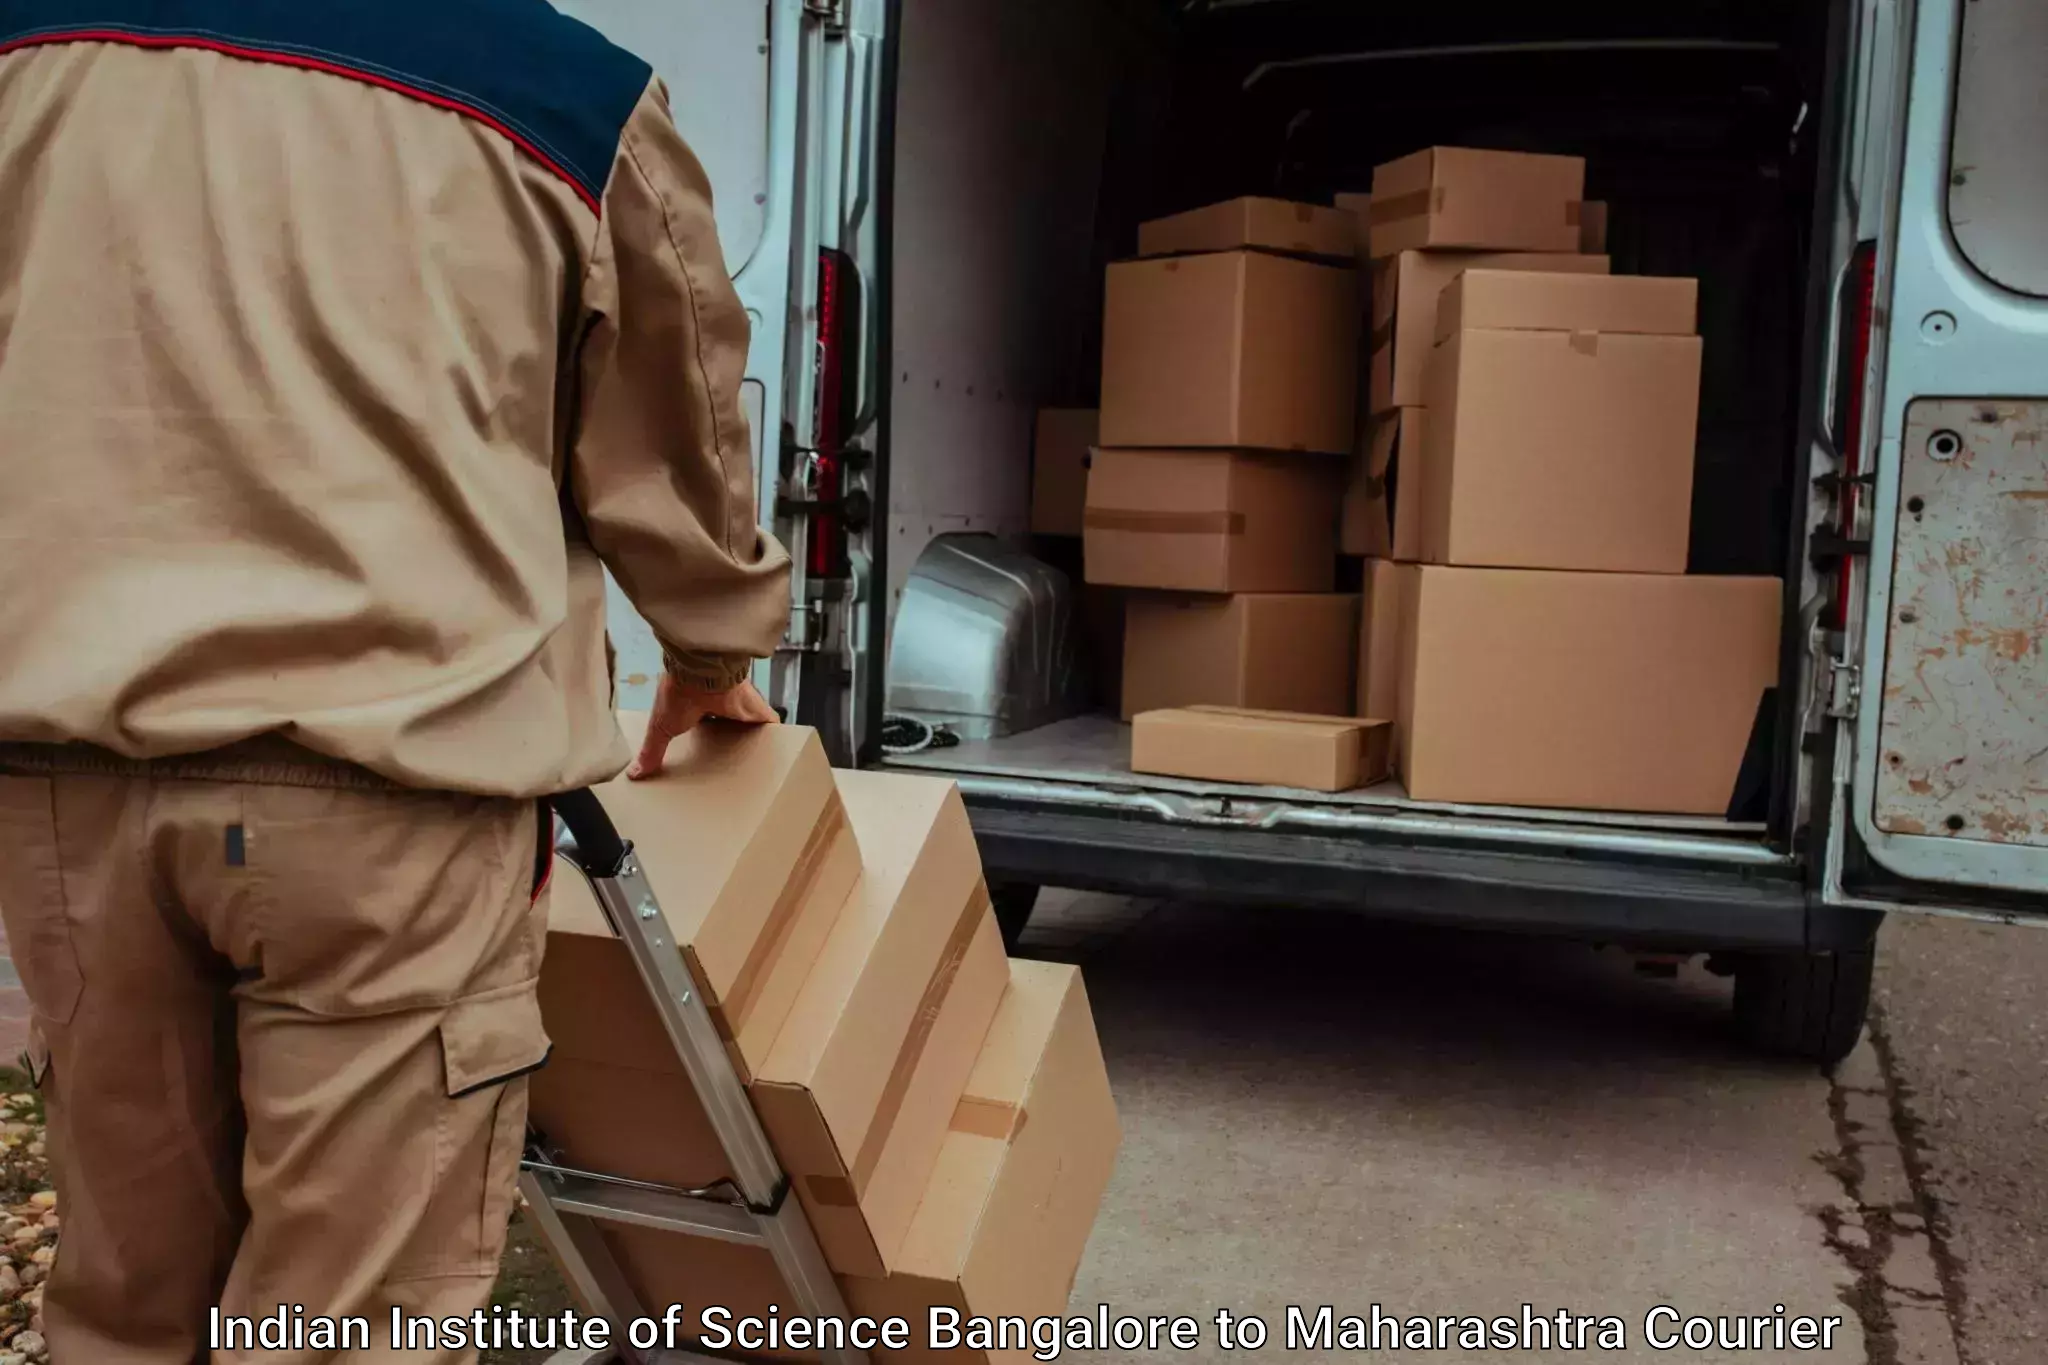 Efficient packing and moving Indian Institute of Science Bangalore to Kagal